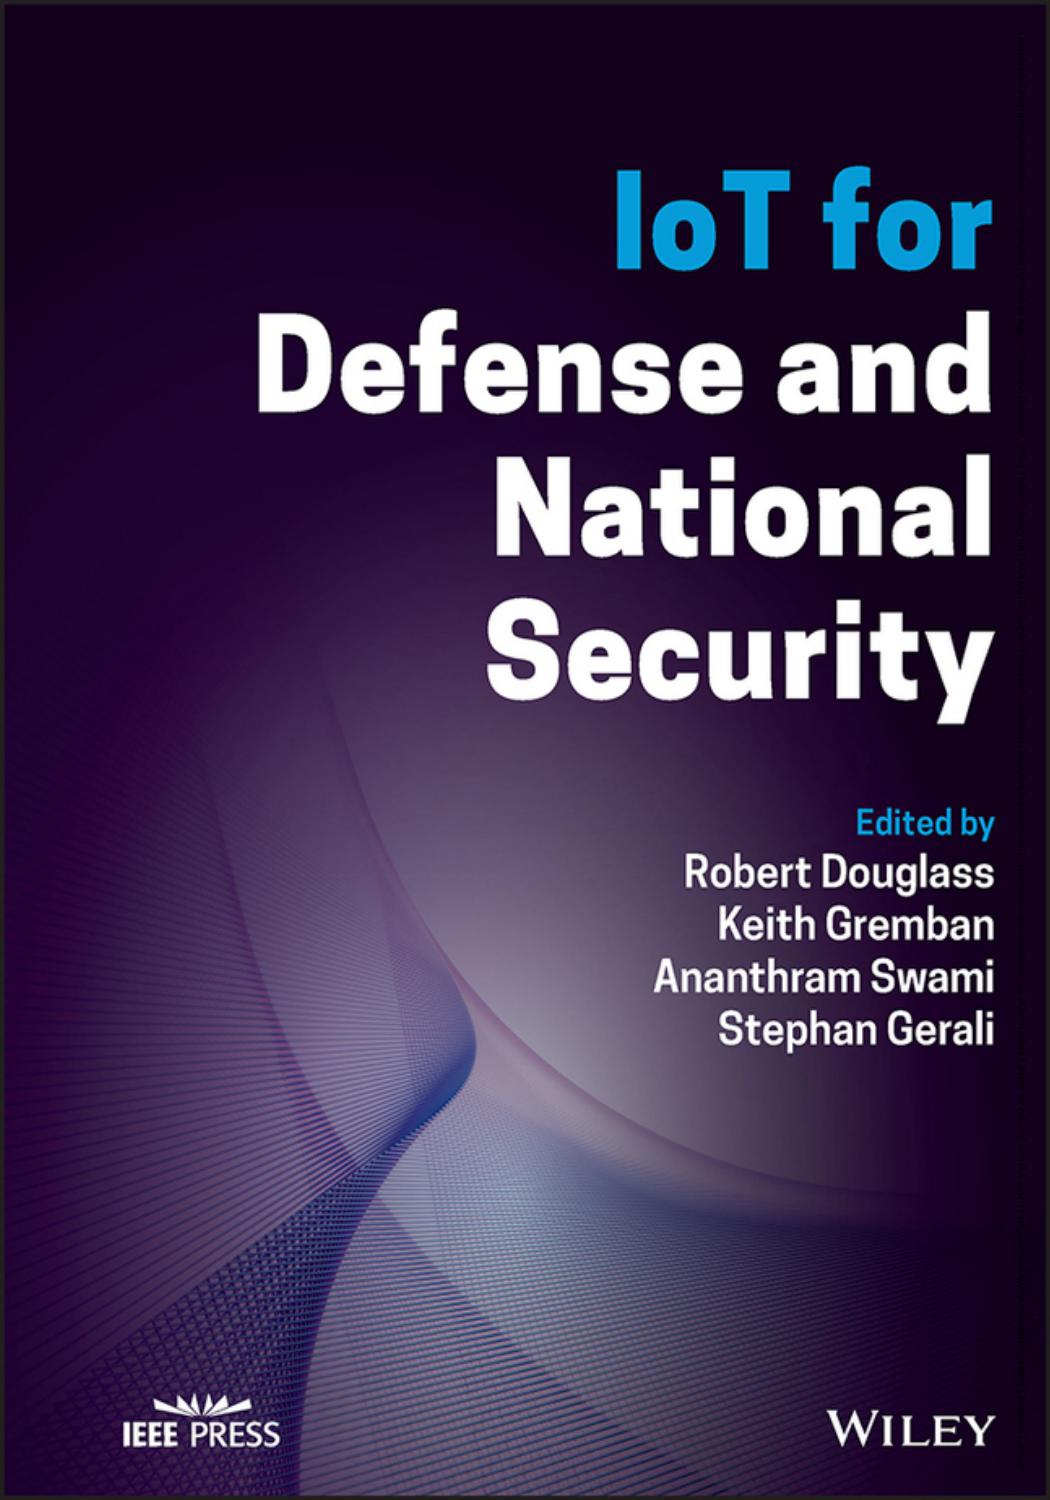 IoT for Defense and National Security by Keith Gremban Ananthram Swami Robert Douglass Stephan Gerali